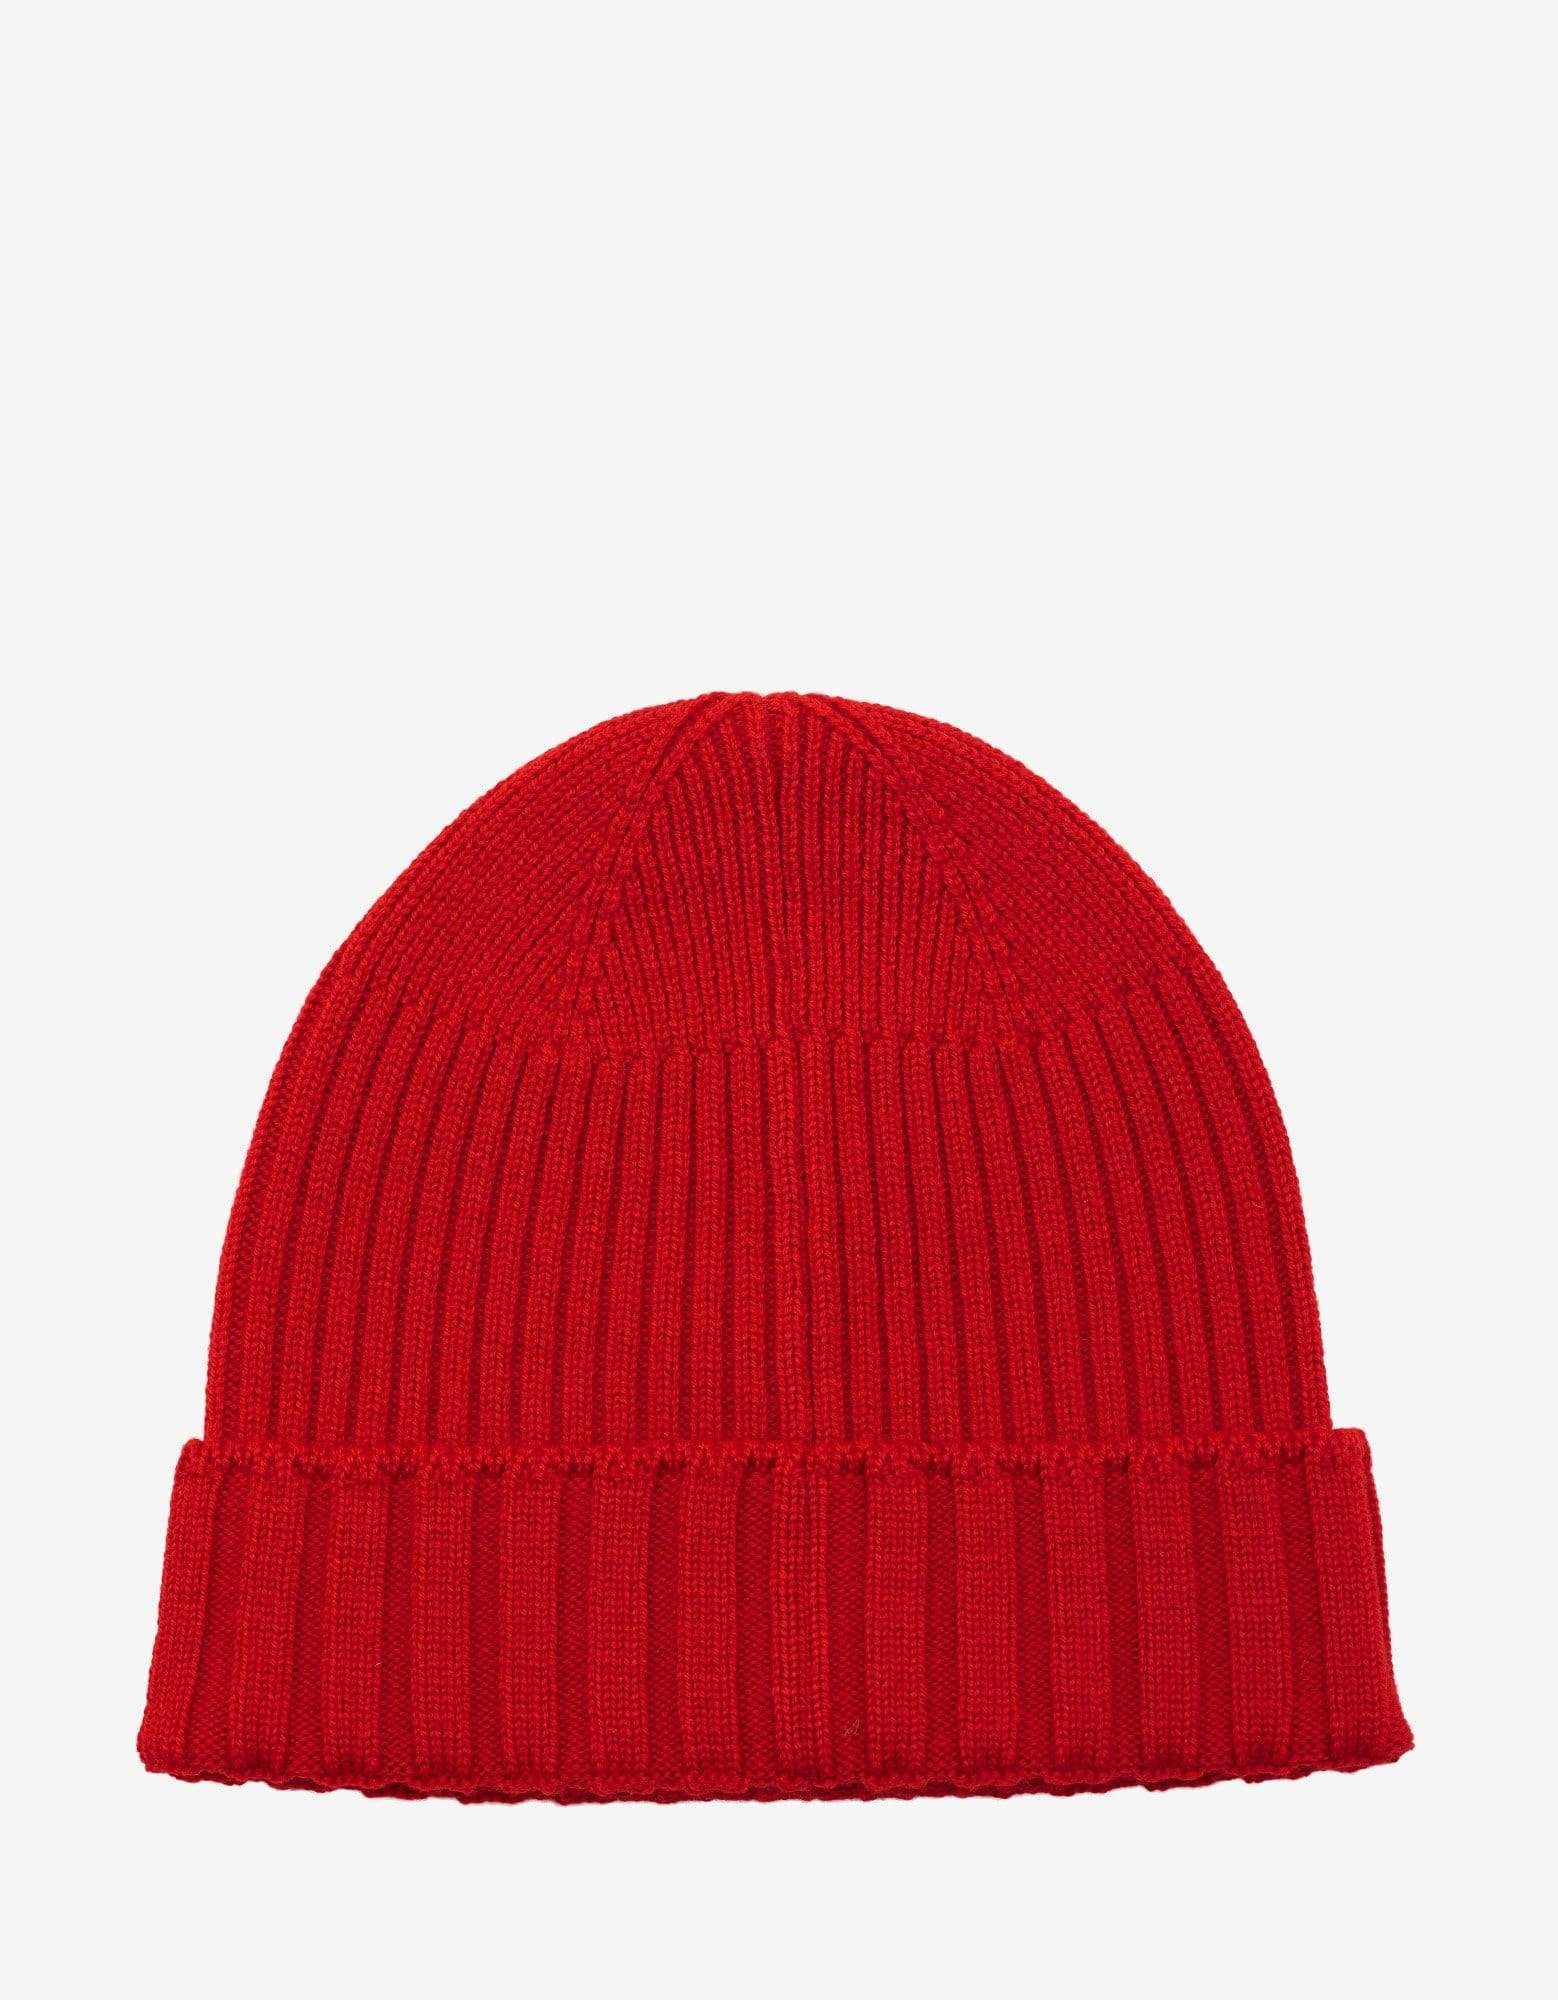 Red Ribbed Wool Beanie Hat - 2